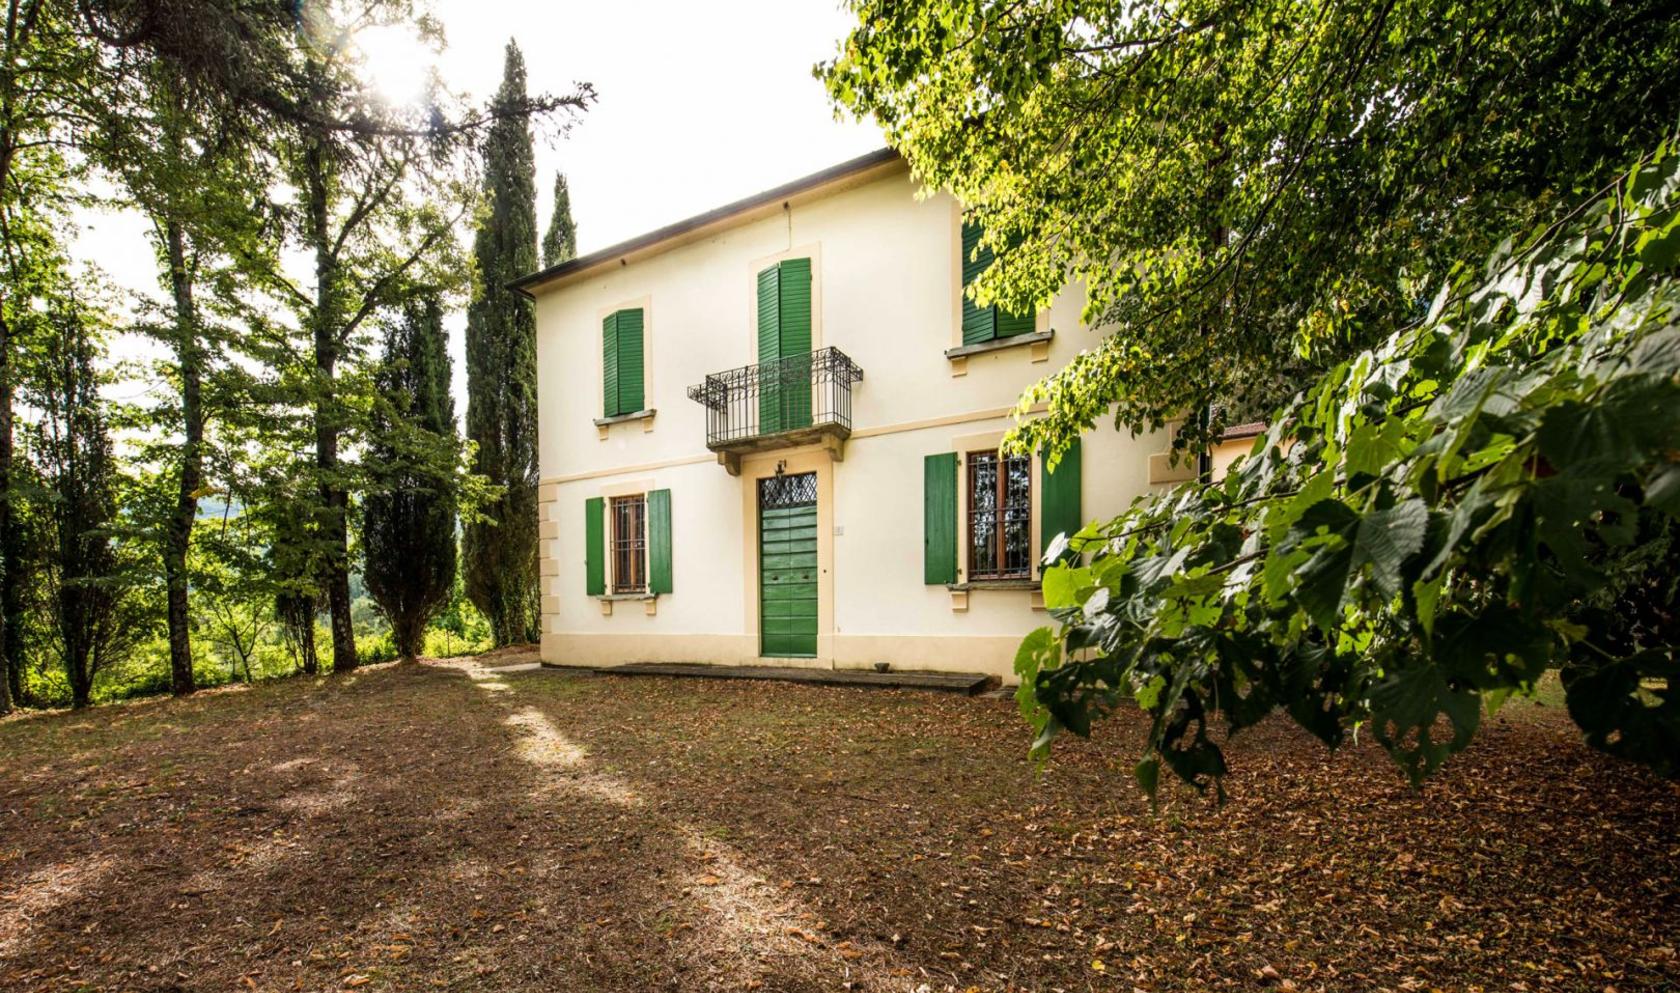 Toscana Immobiliare - Villa with land and outbuilding for sale in Arezzo, Tuscany